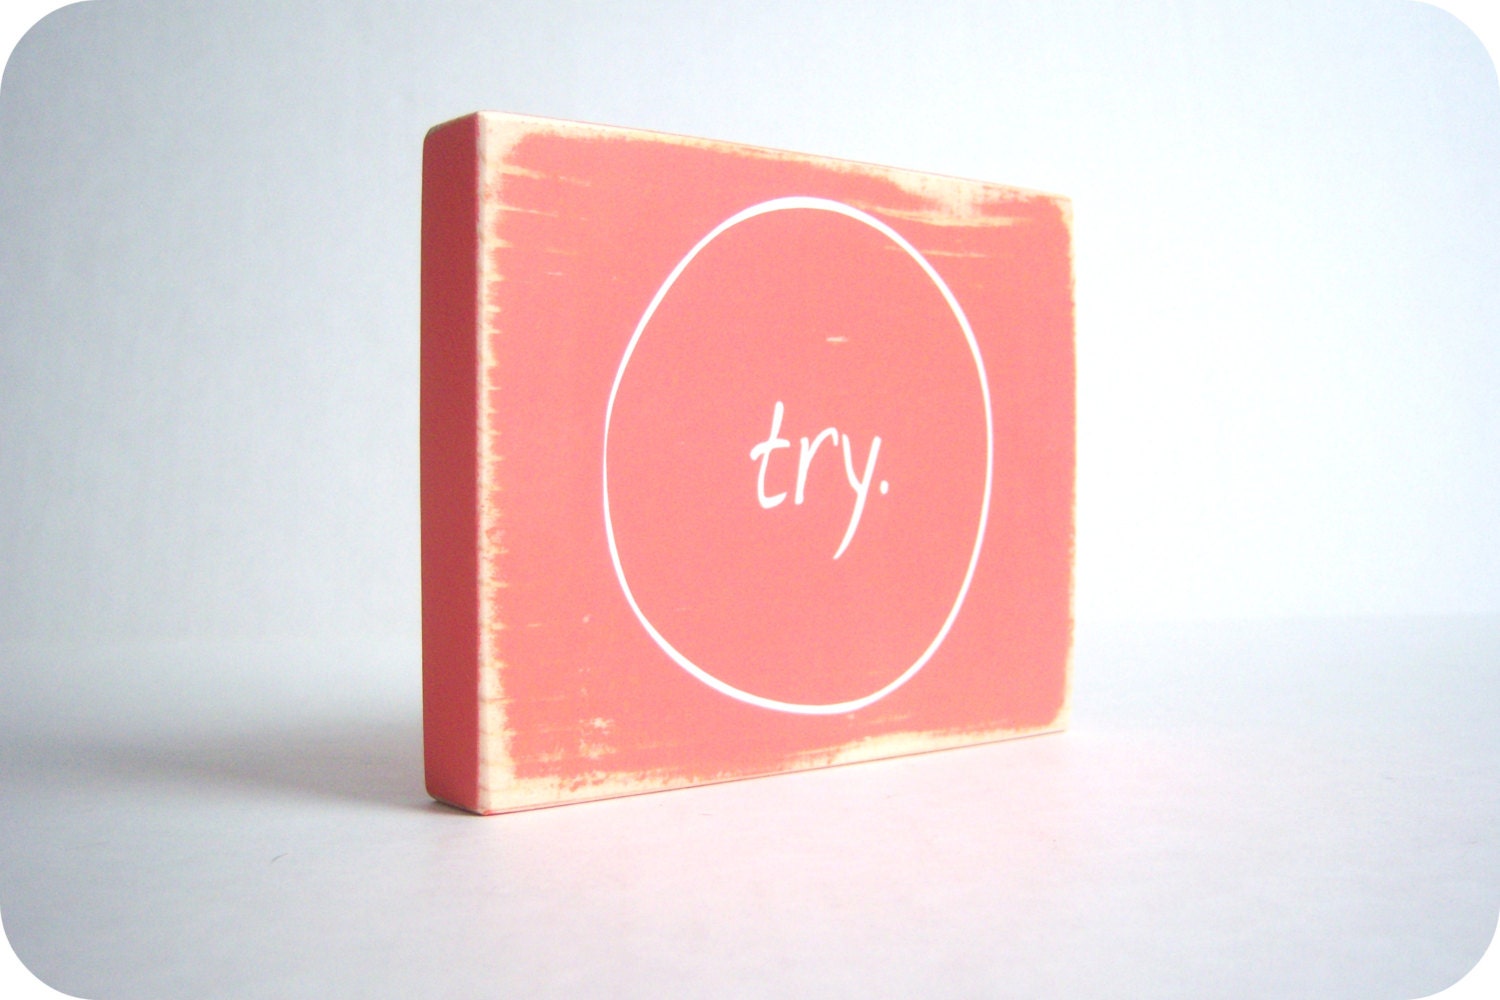 Try. Wood Block Home Decor and Gift. - bubblewrappd